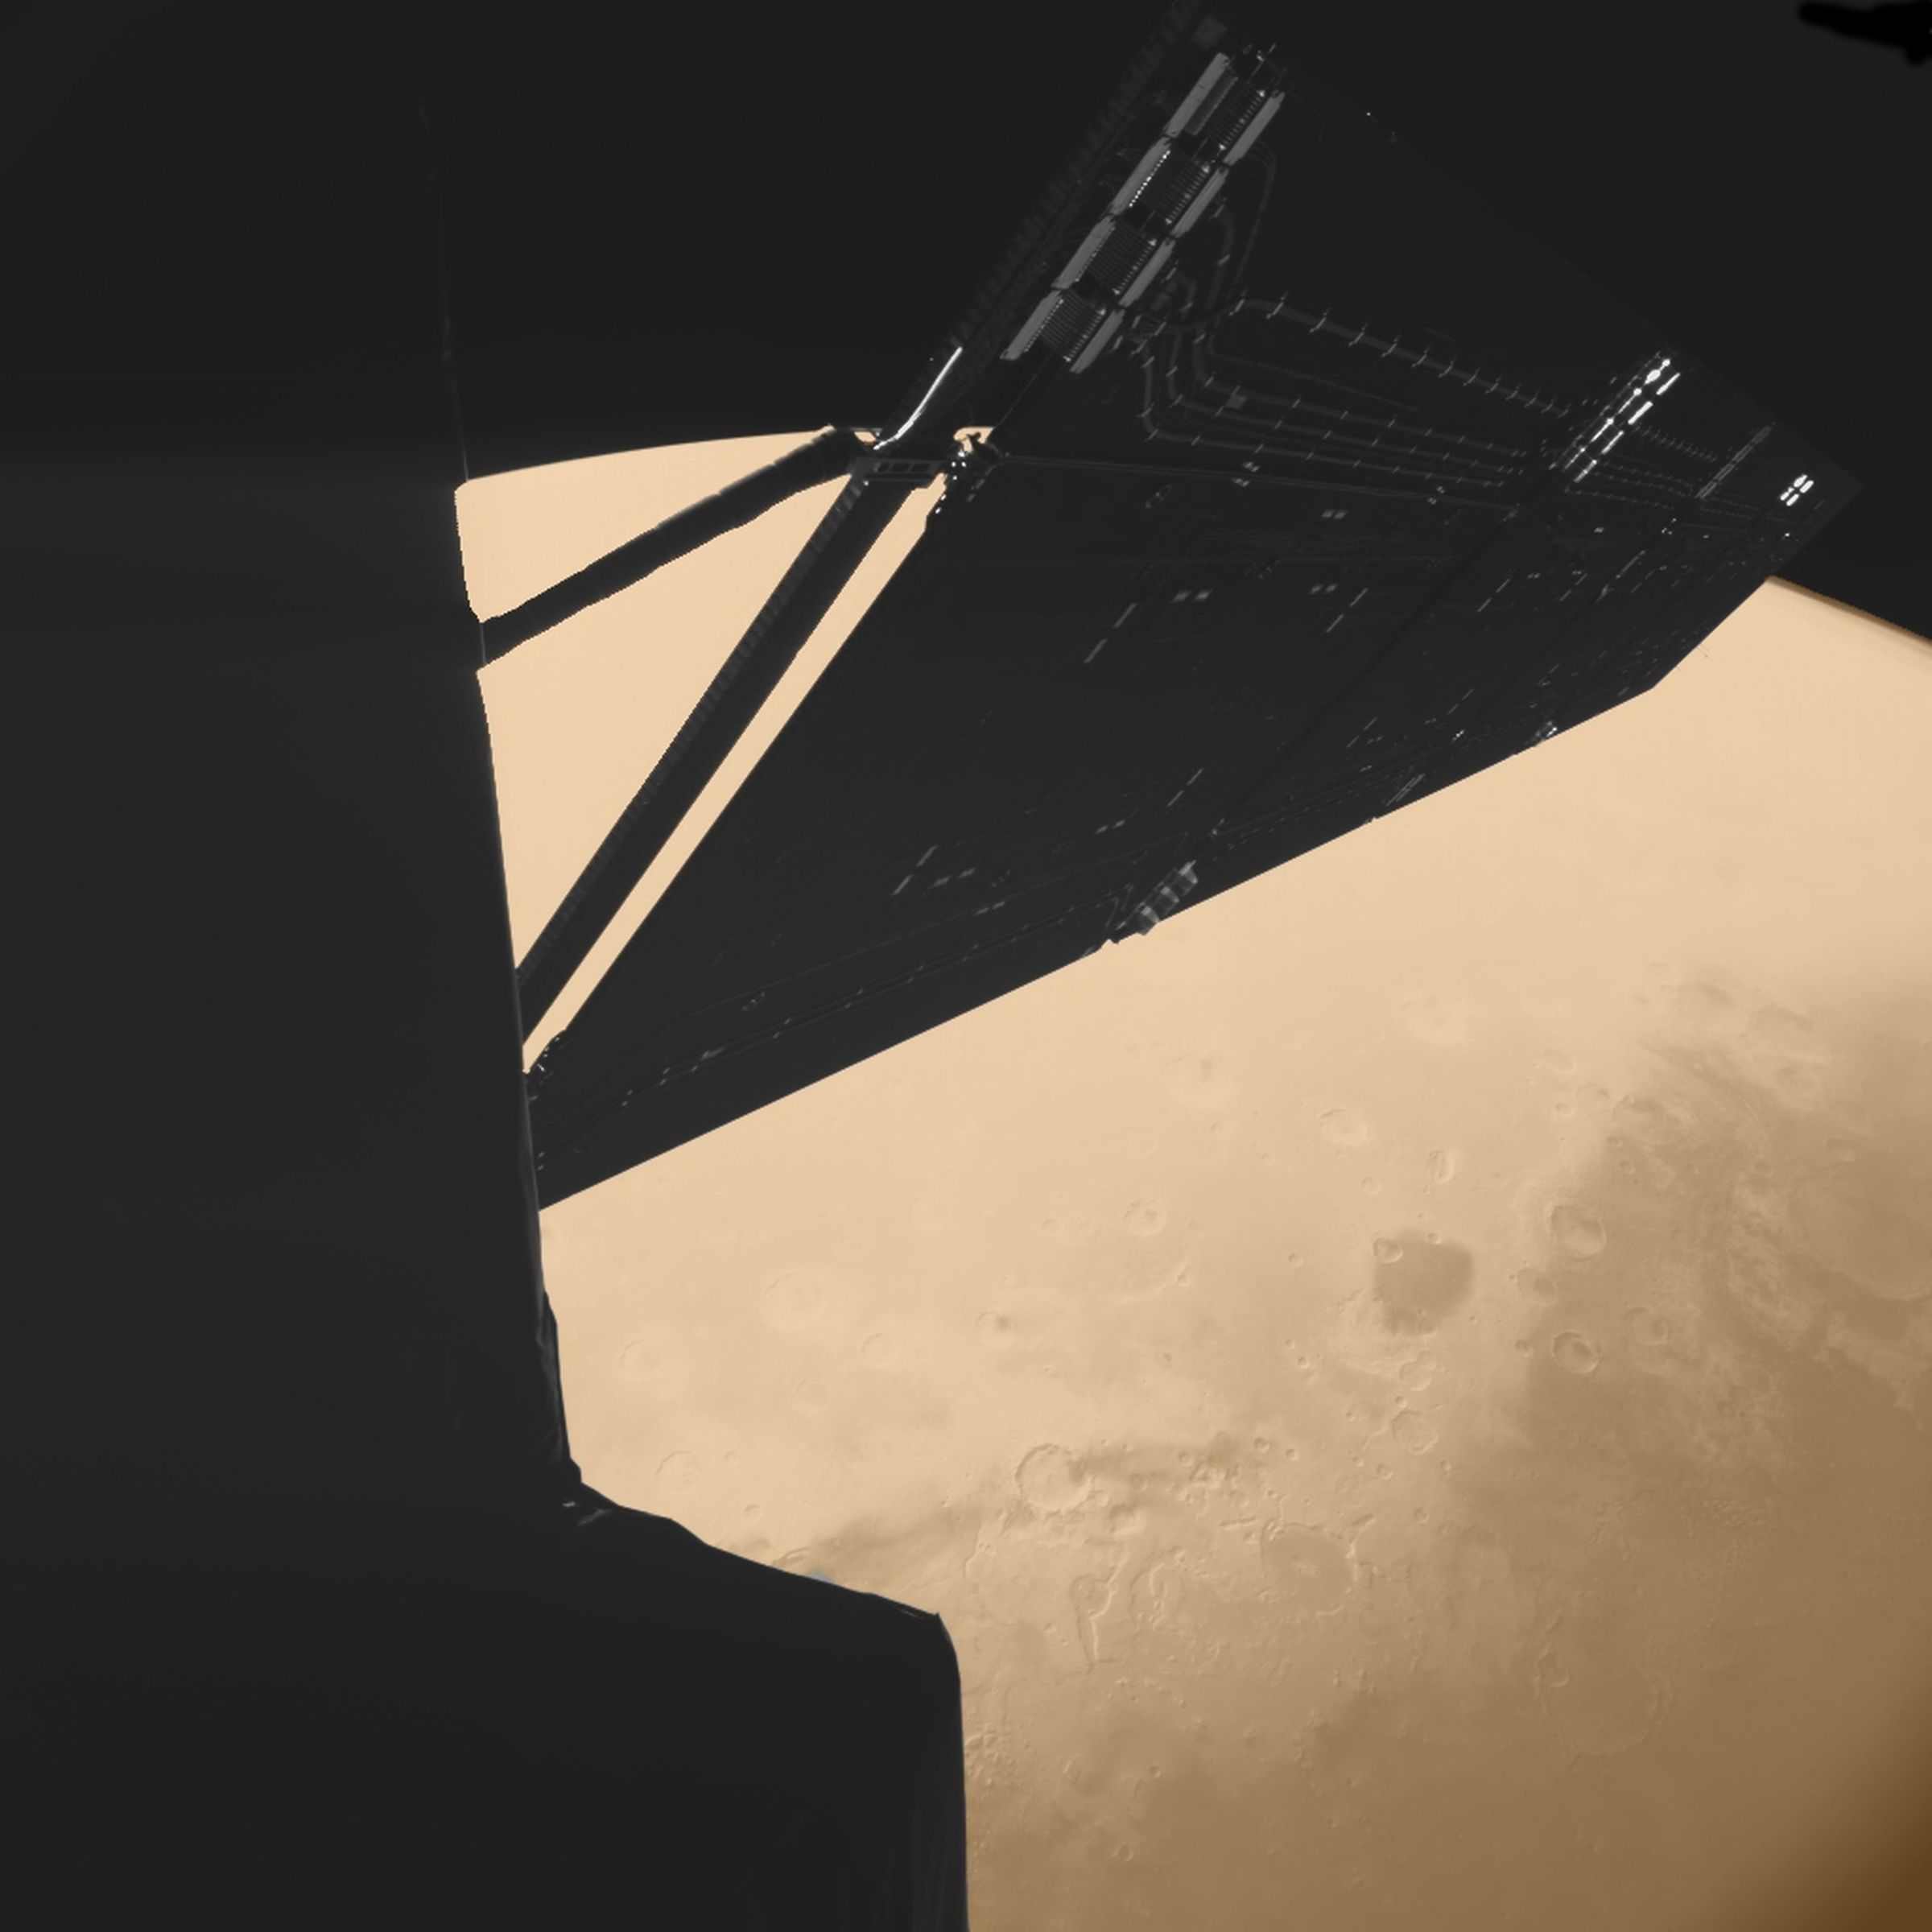 Mars, as photographed by Philae